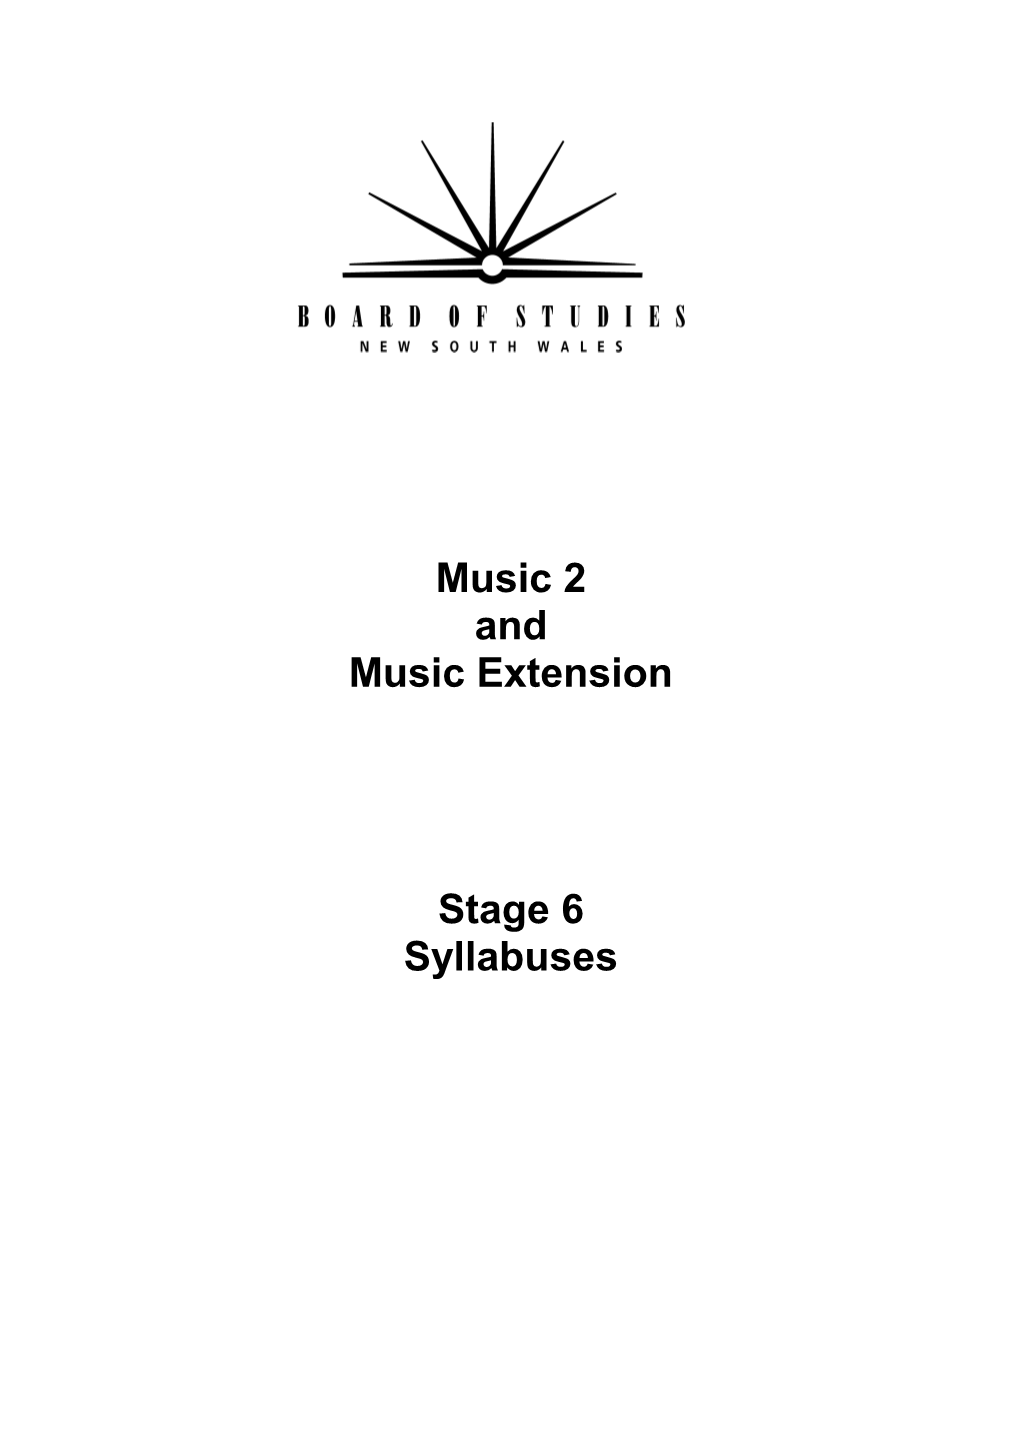 Music 2 and Music Extension Stage 6 Syllabus s1